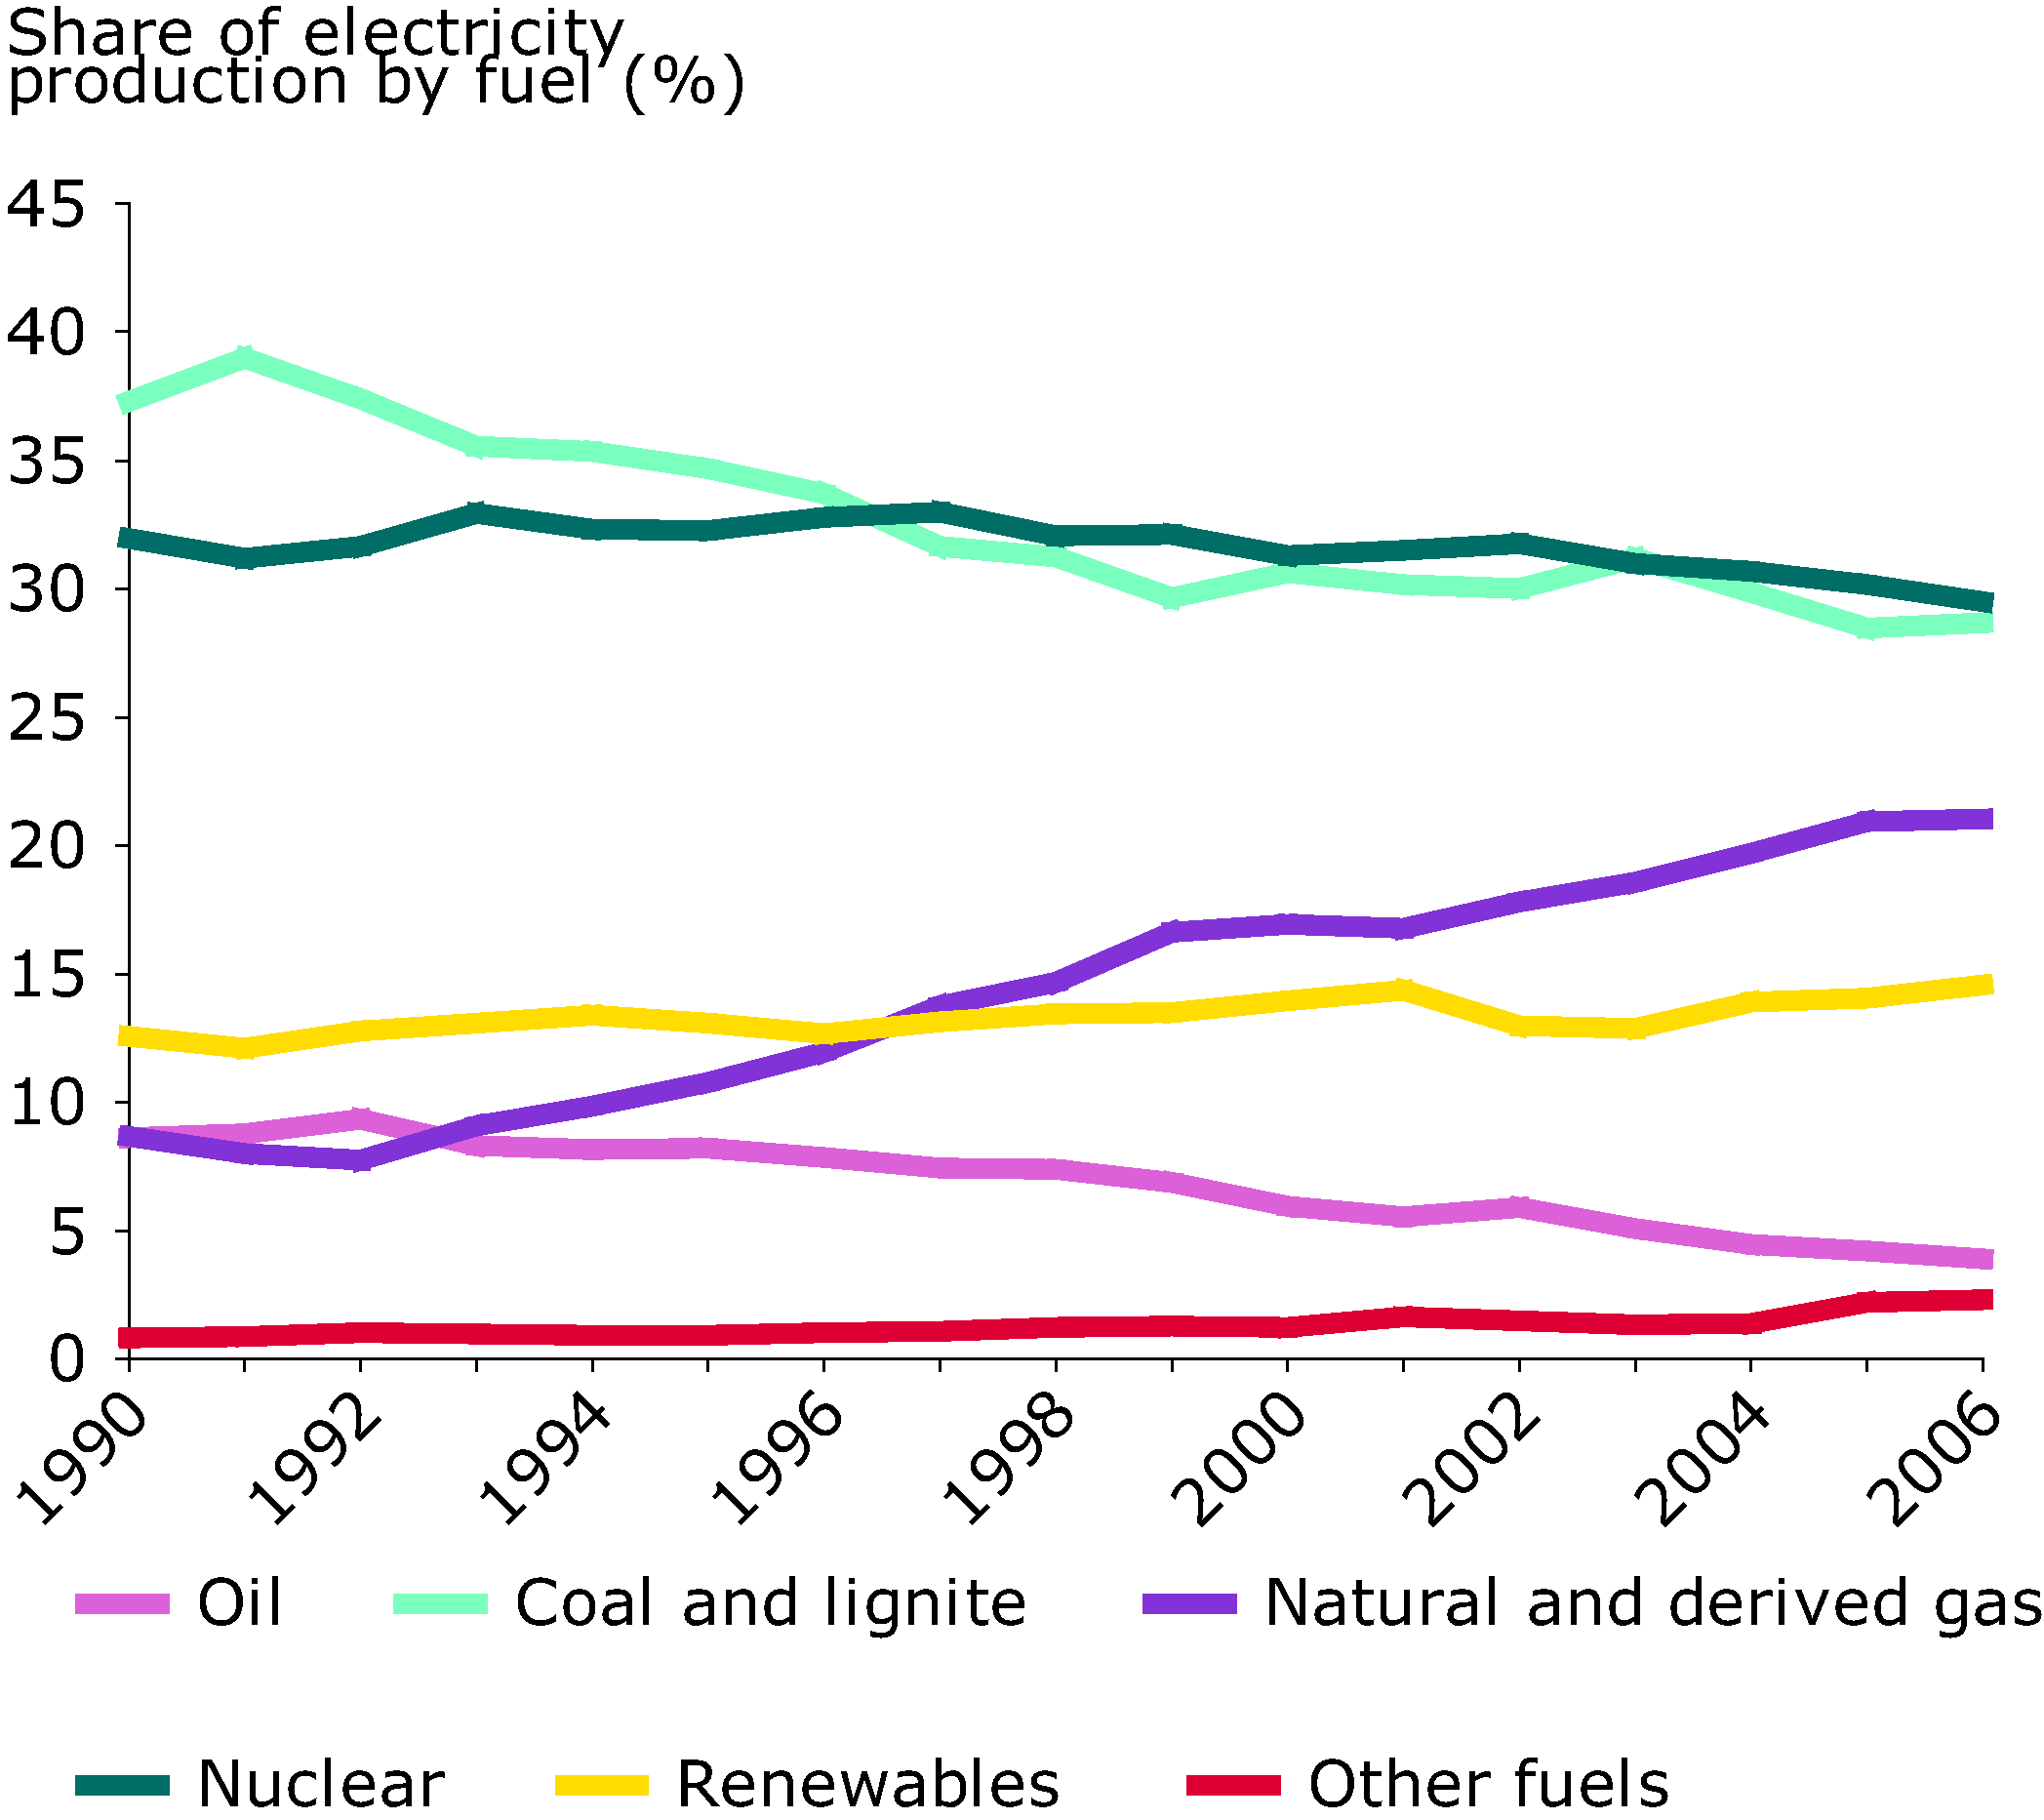 Share of electricity production by fuel type, 1990-2006 (%), EU-27